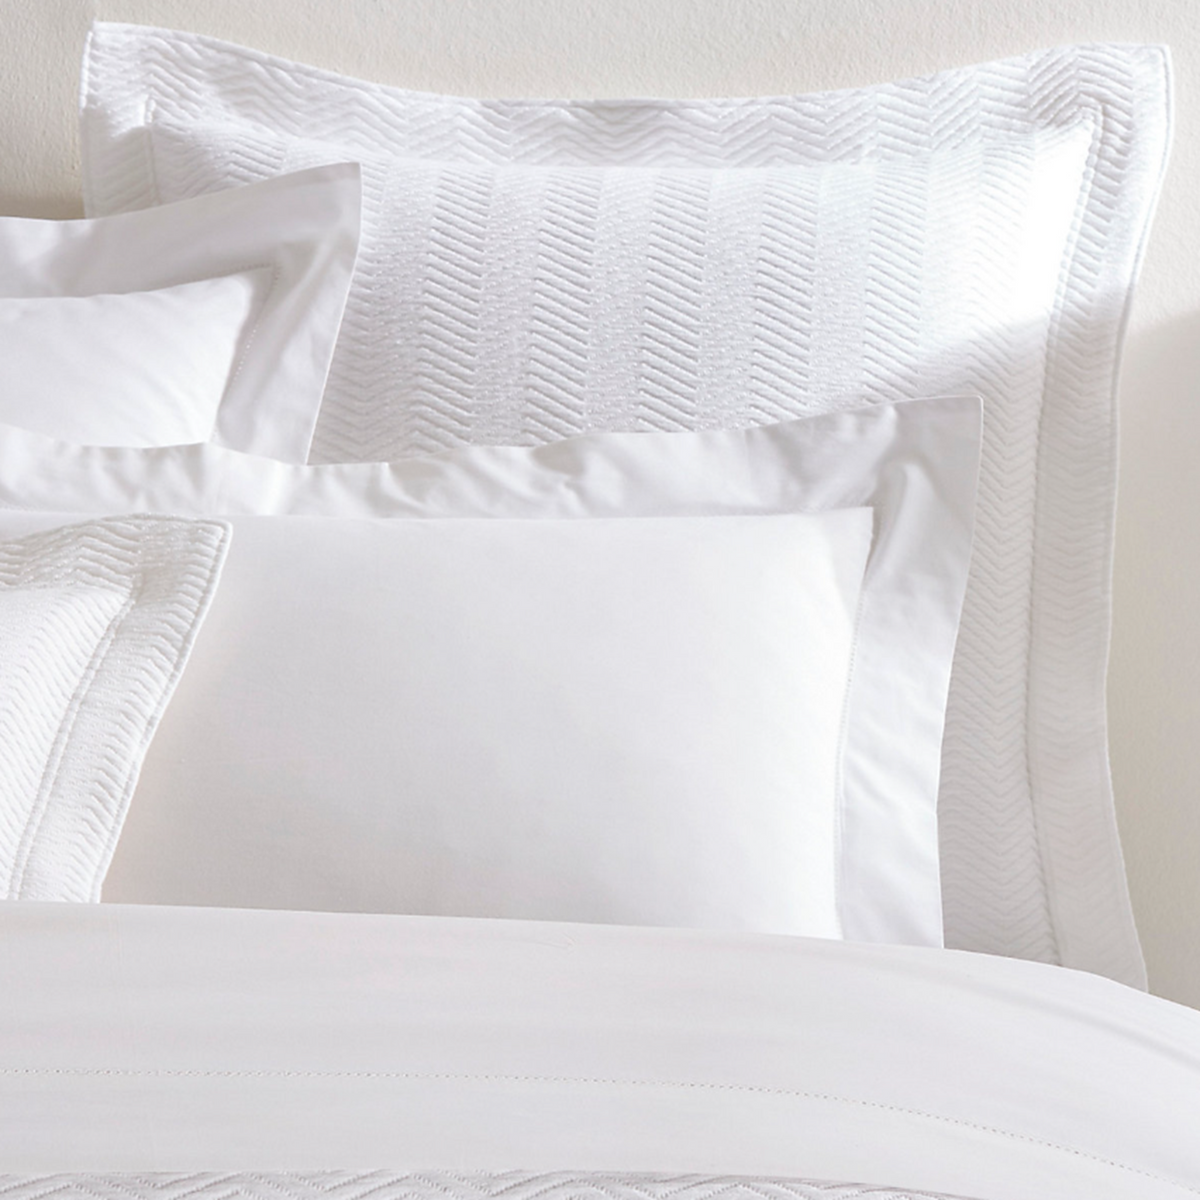 Close Up Image of Pine Cone Hill Winnie Matelassé Bedding in White Color